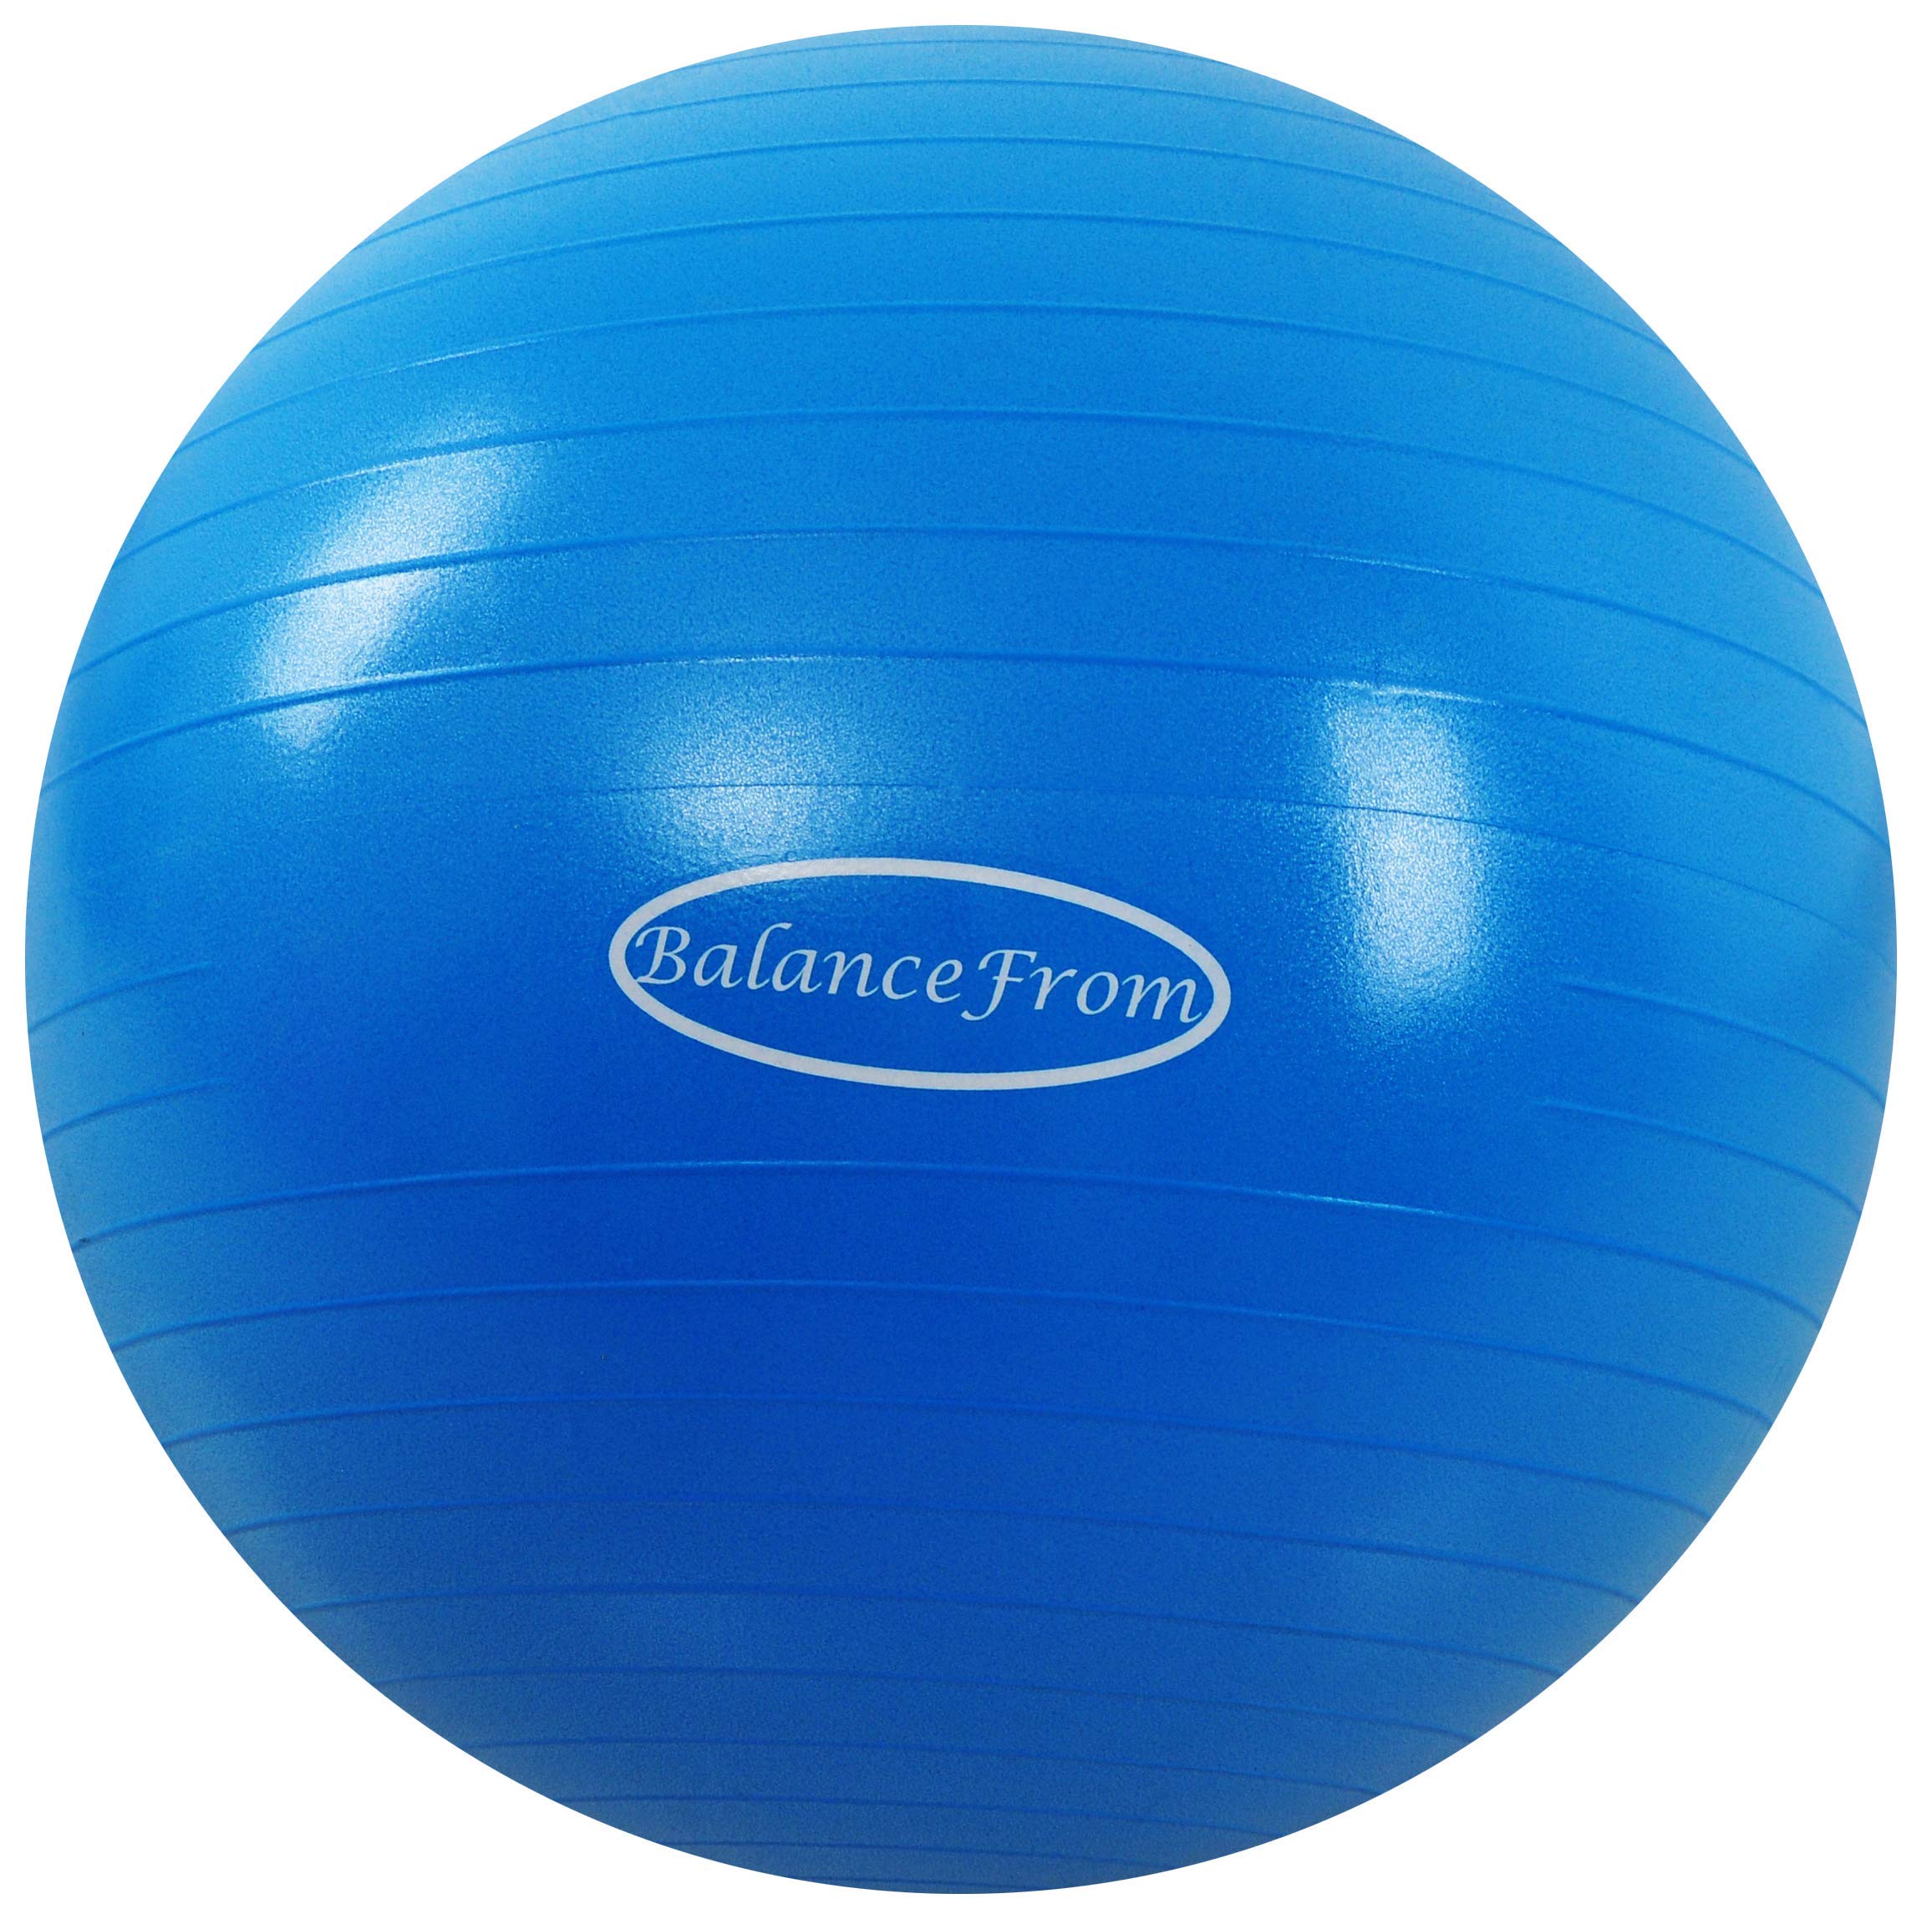 BalanceFrom Anti-Burst and Slip Resistant Exercise Ball Yoga Ball Fitness  Ball Birthing Ball with Quick Pump, 2,000-Pound Capacity Blue 26-inch, L